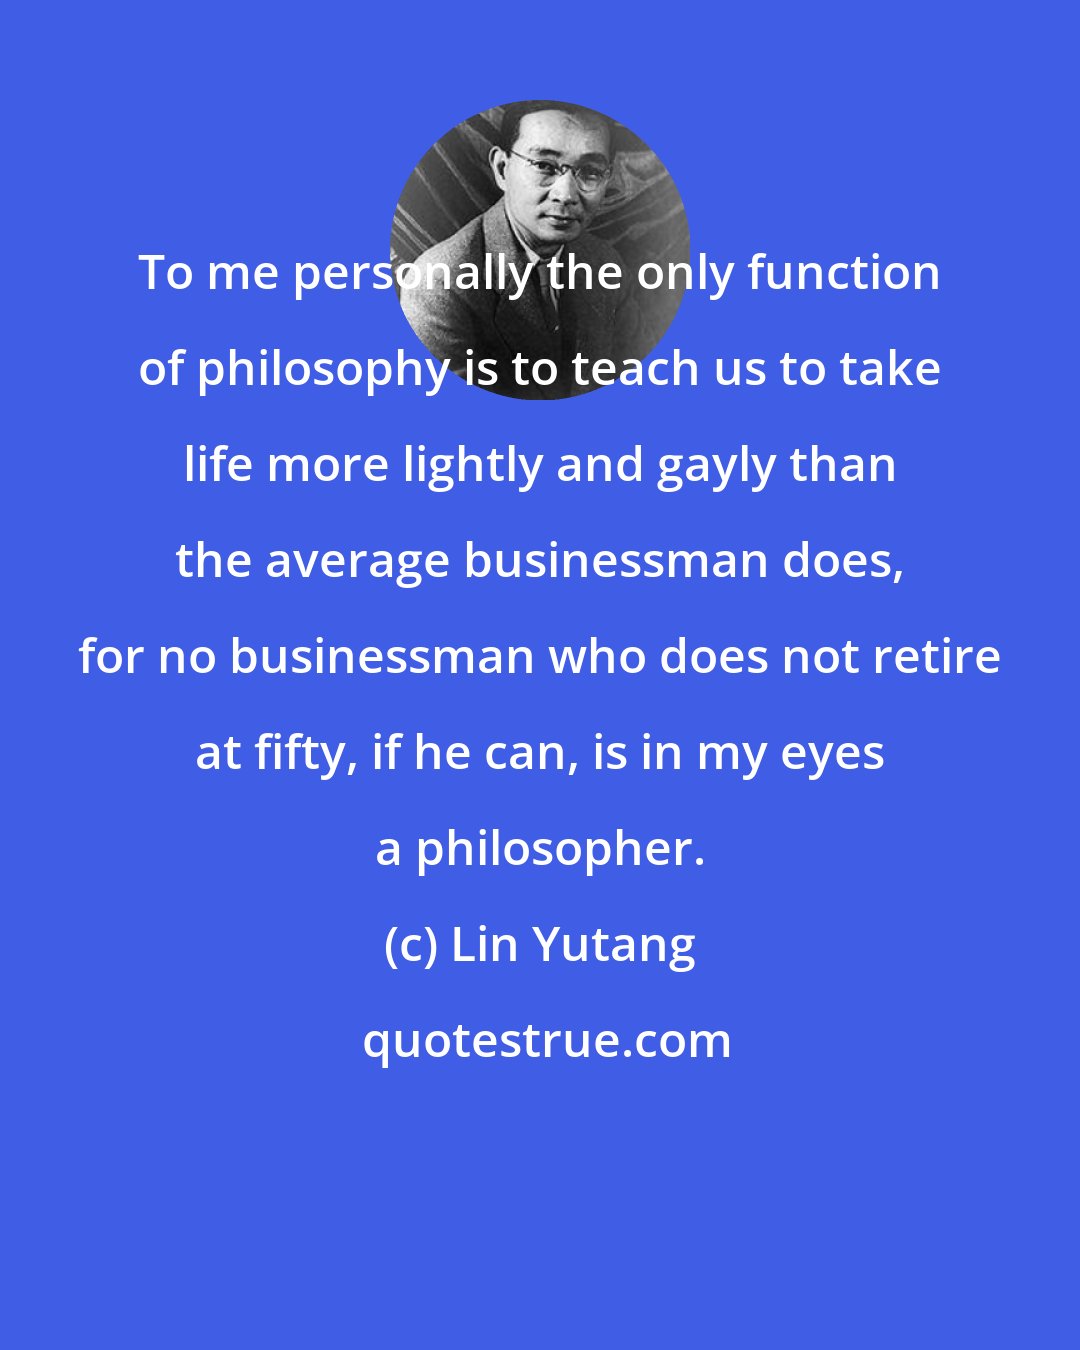 Lin Yutang: To me personally the only function of philosophy is to teach us to take life more lightly and gayly than the average businessman does, for no businessman who does not retire at fifty, if he can, is in my eyes a philosopher.